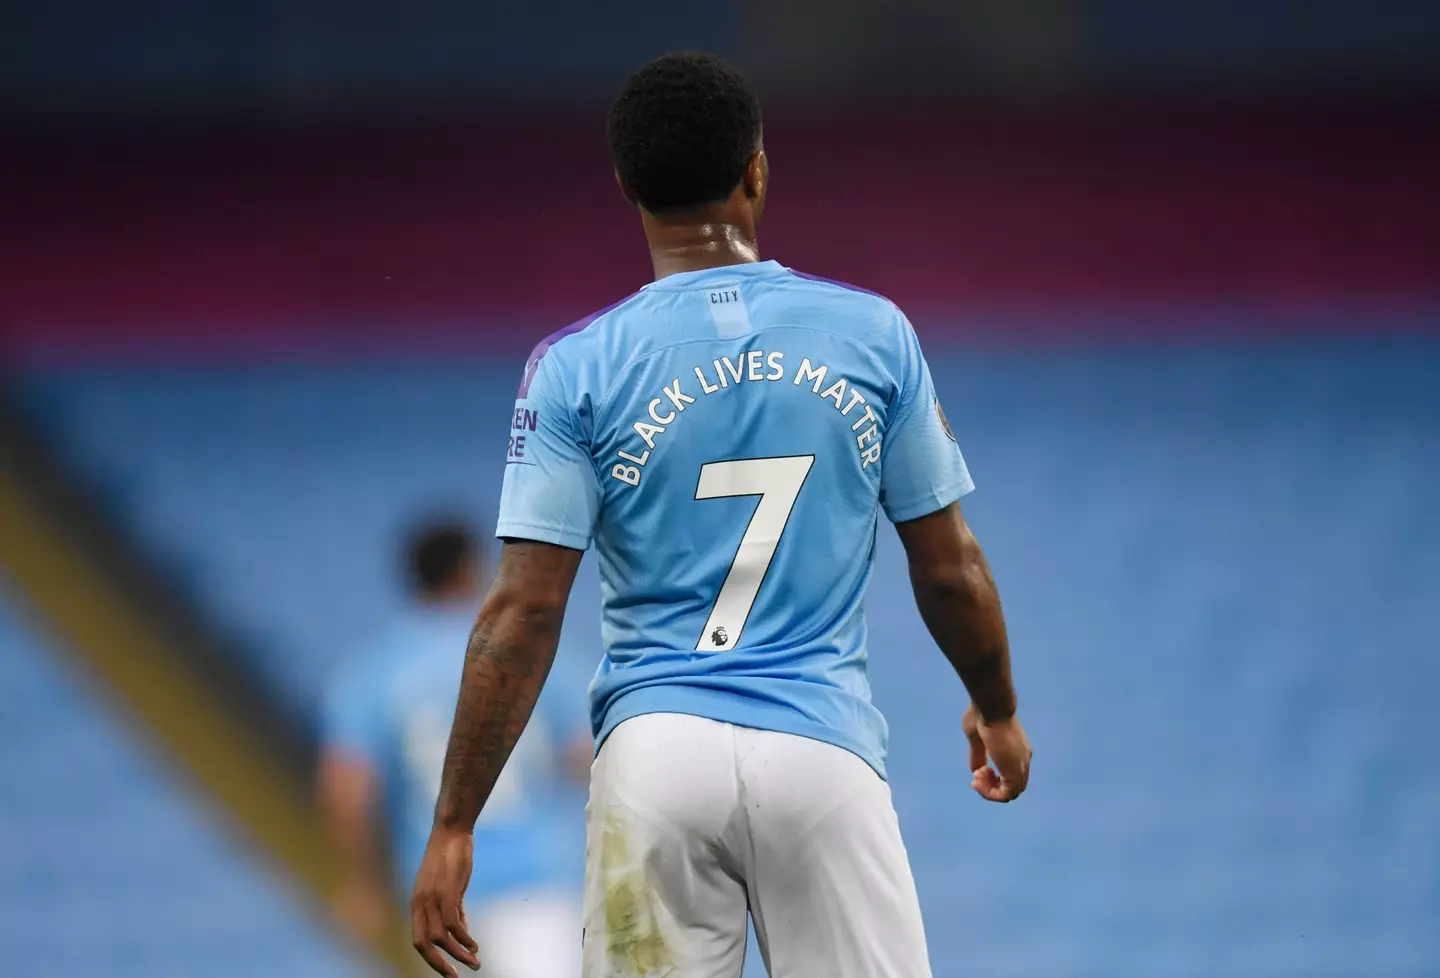 Raheem Sterling has continues to do admarable work his platform to fight against racism. (Alamy)